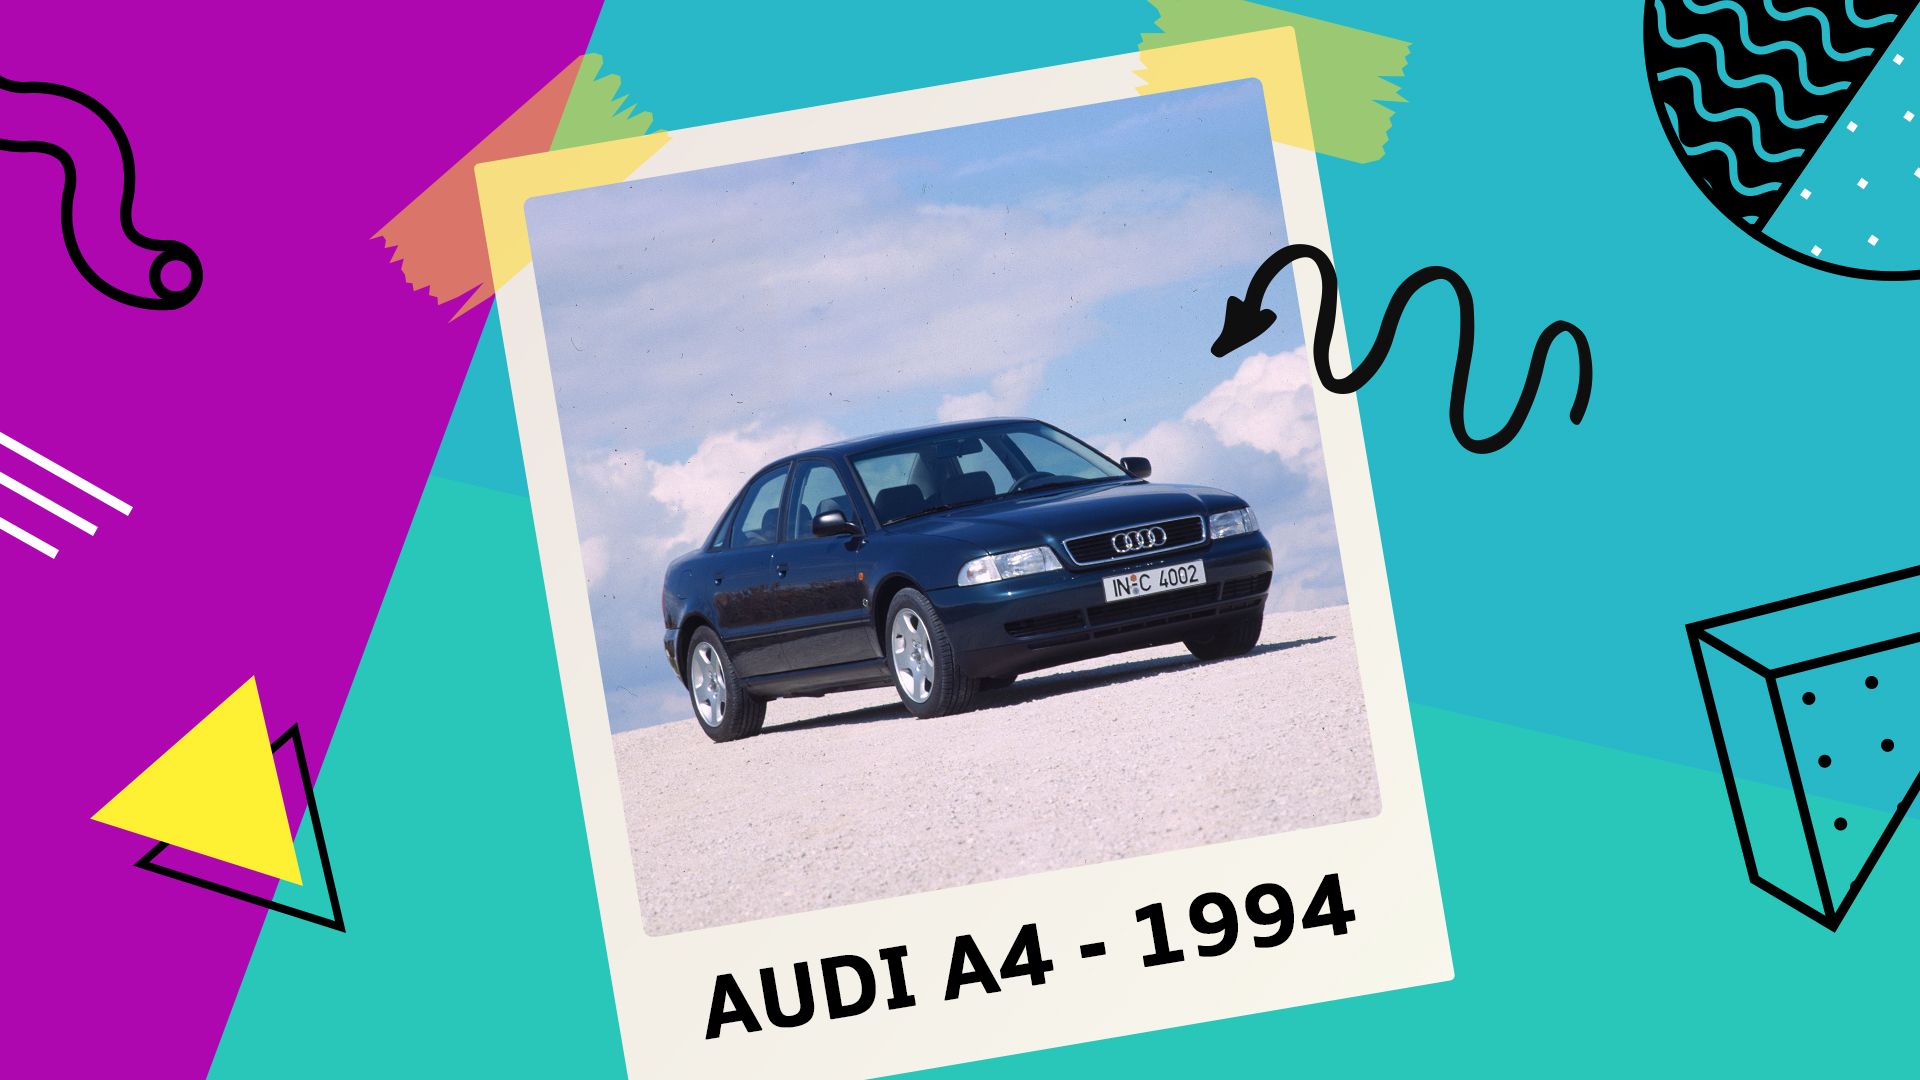 90s Cult Car: 25 Years of the Audi A4